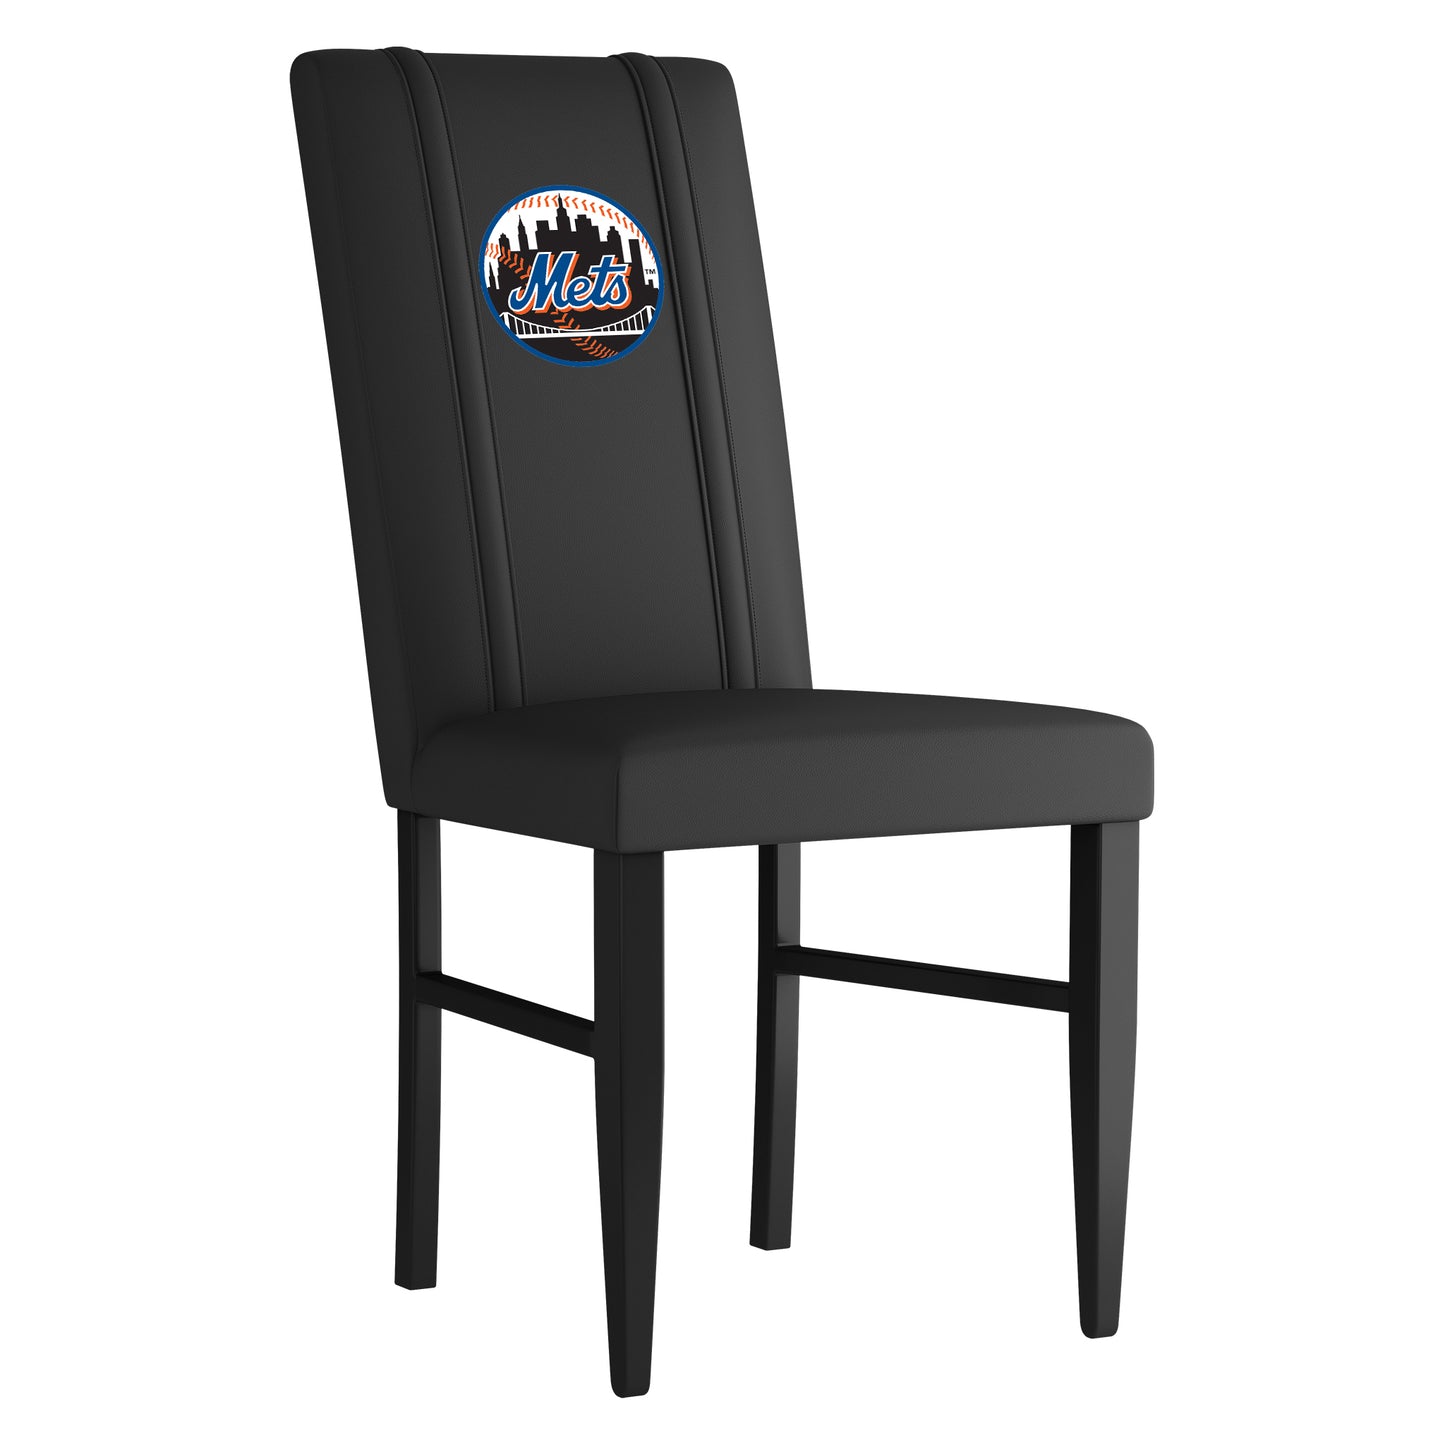 Side Chair 2000 with New York Mets Cooperstown Secondary Set of 2